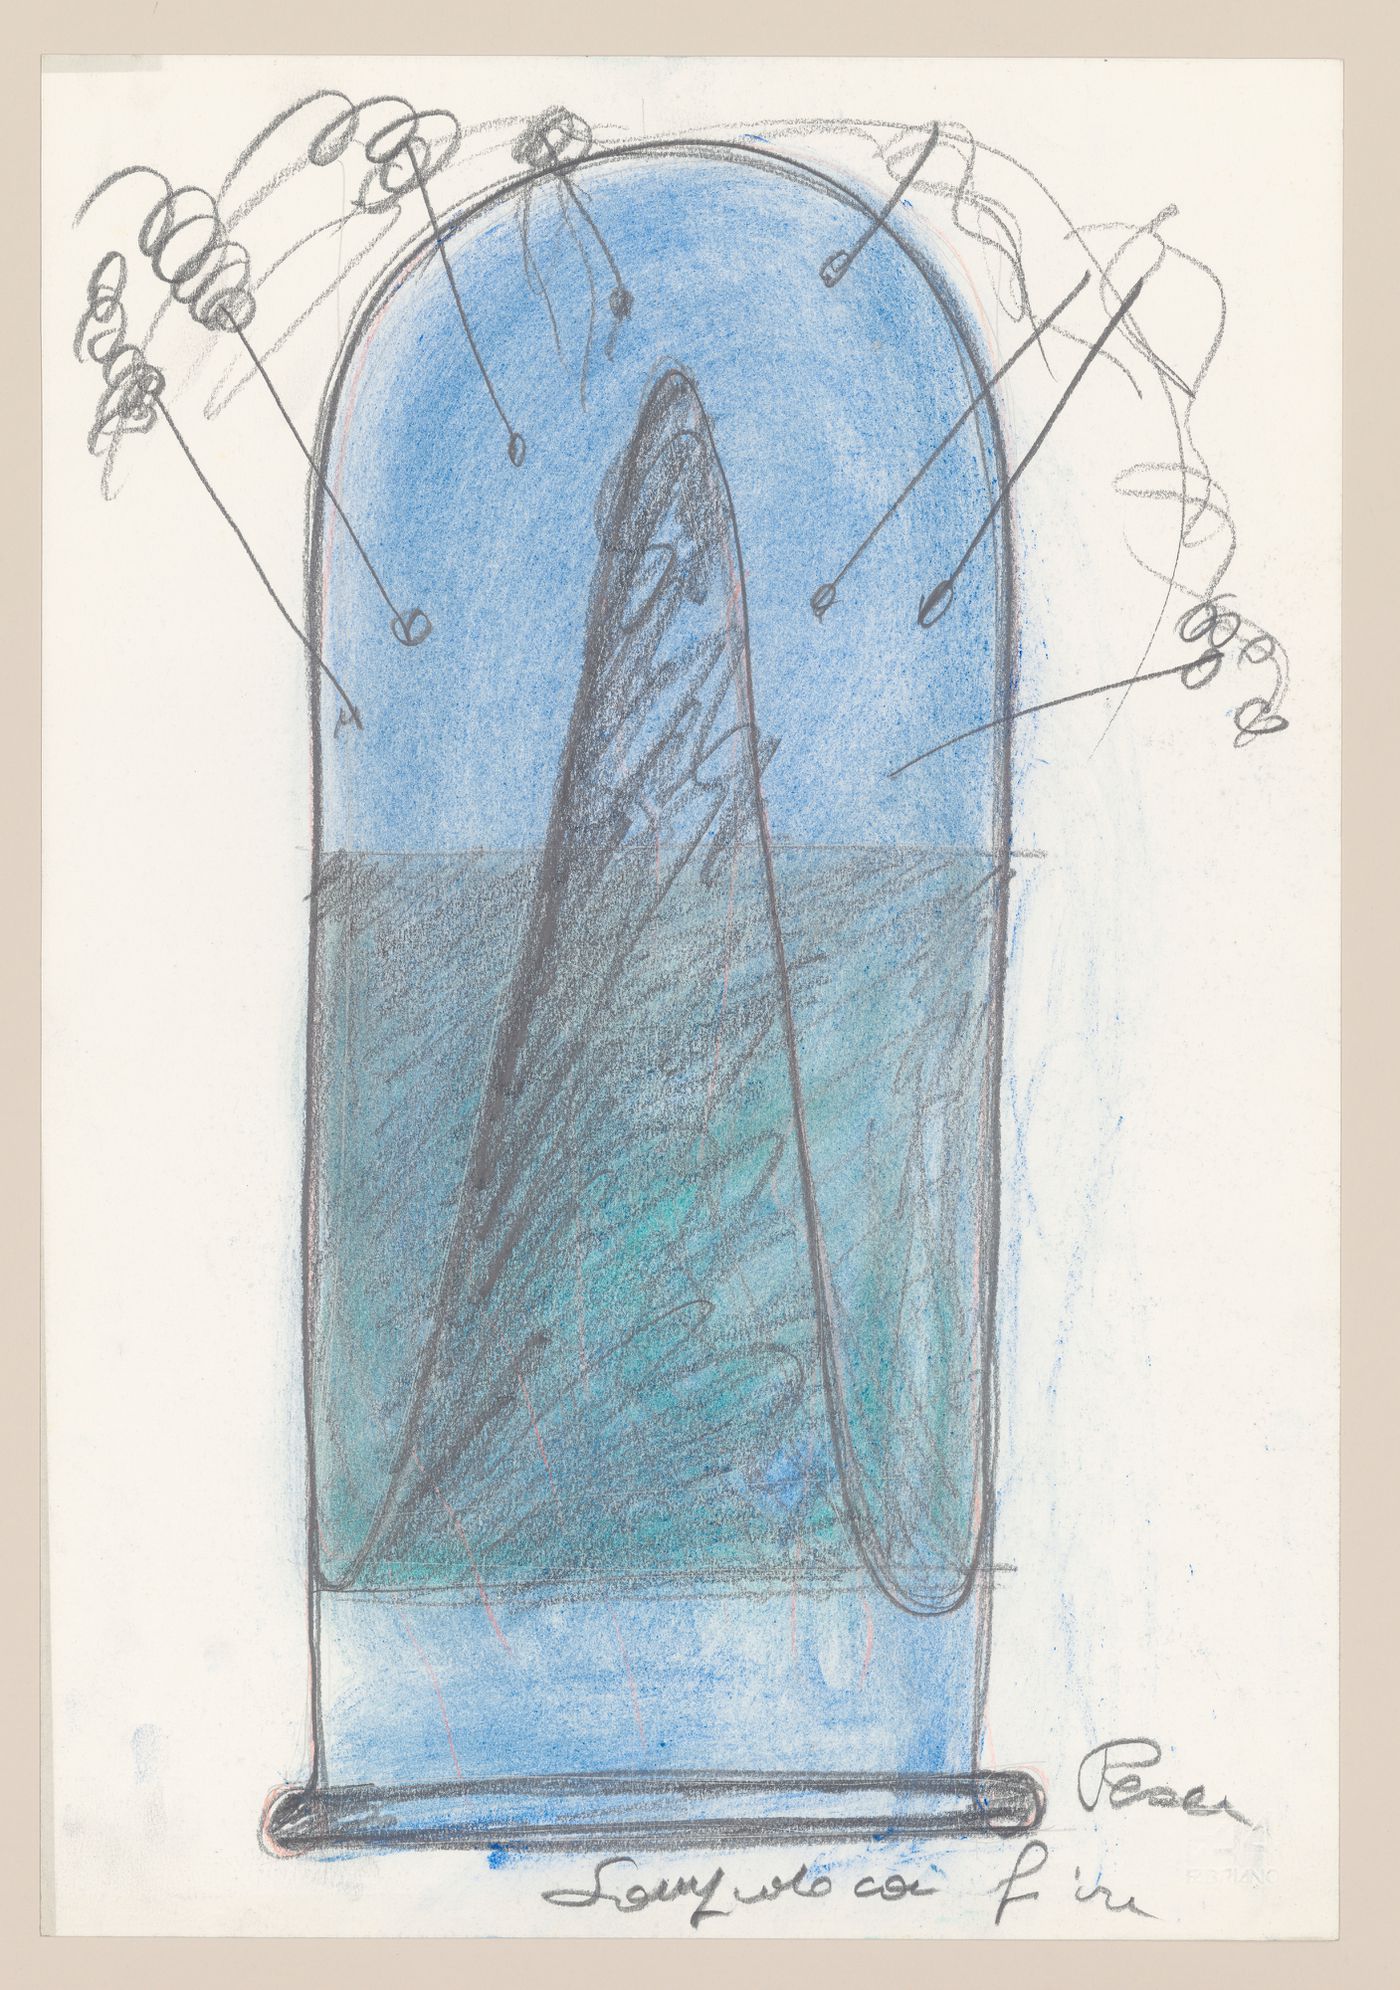 Sketch (from the project-file "Sketches and drawings on various projects, including lamp designs, 1970s-1980s")